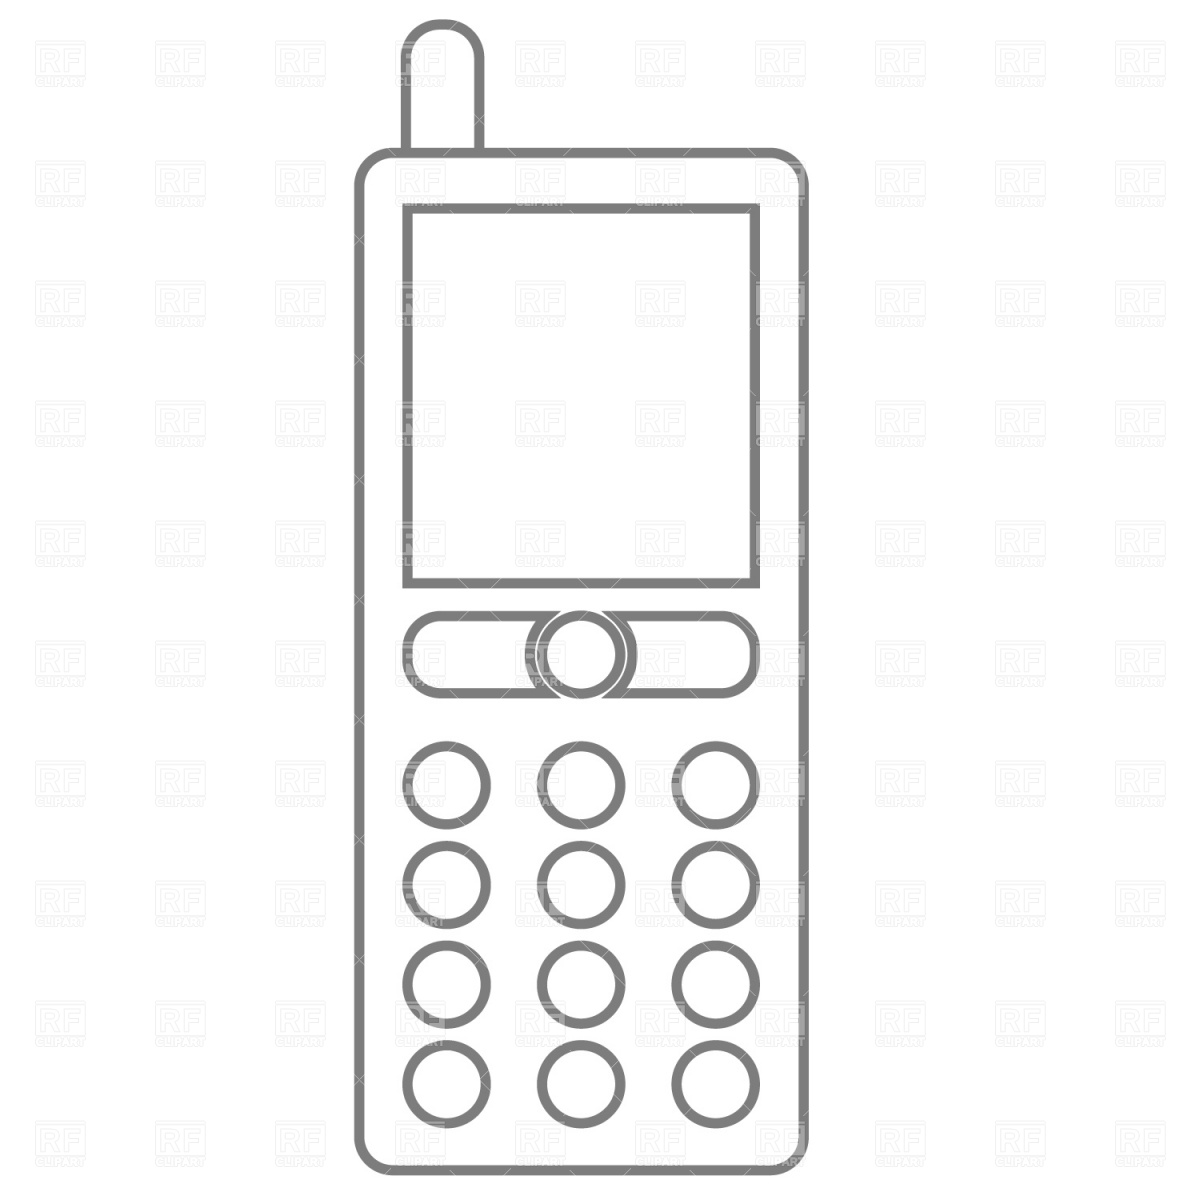 cell phone clipart black and white - photo #20